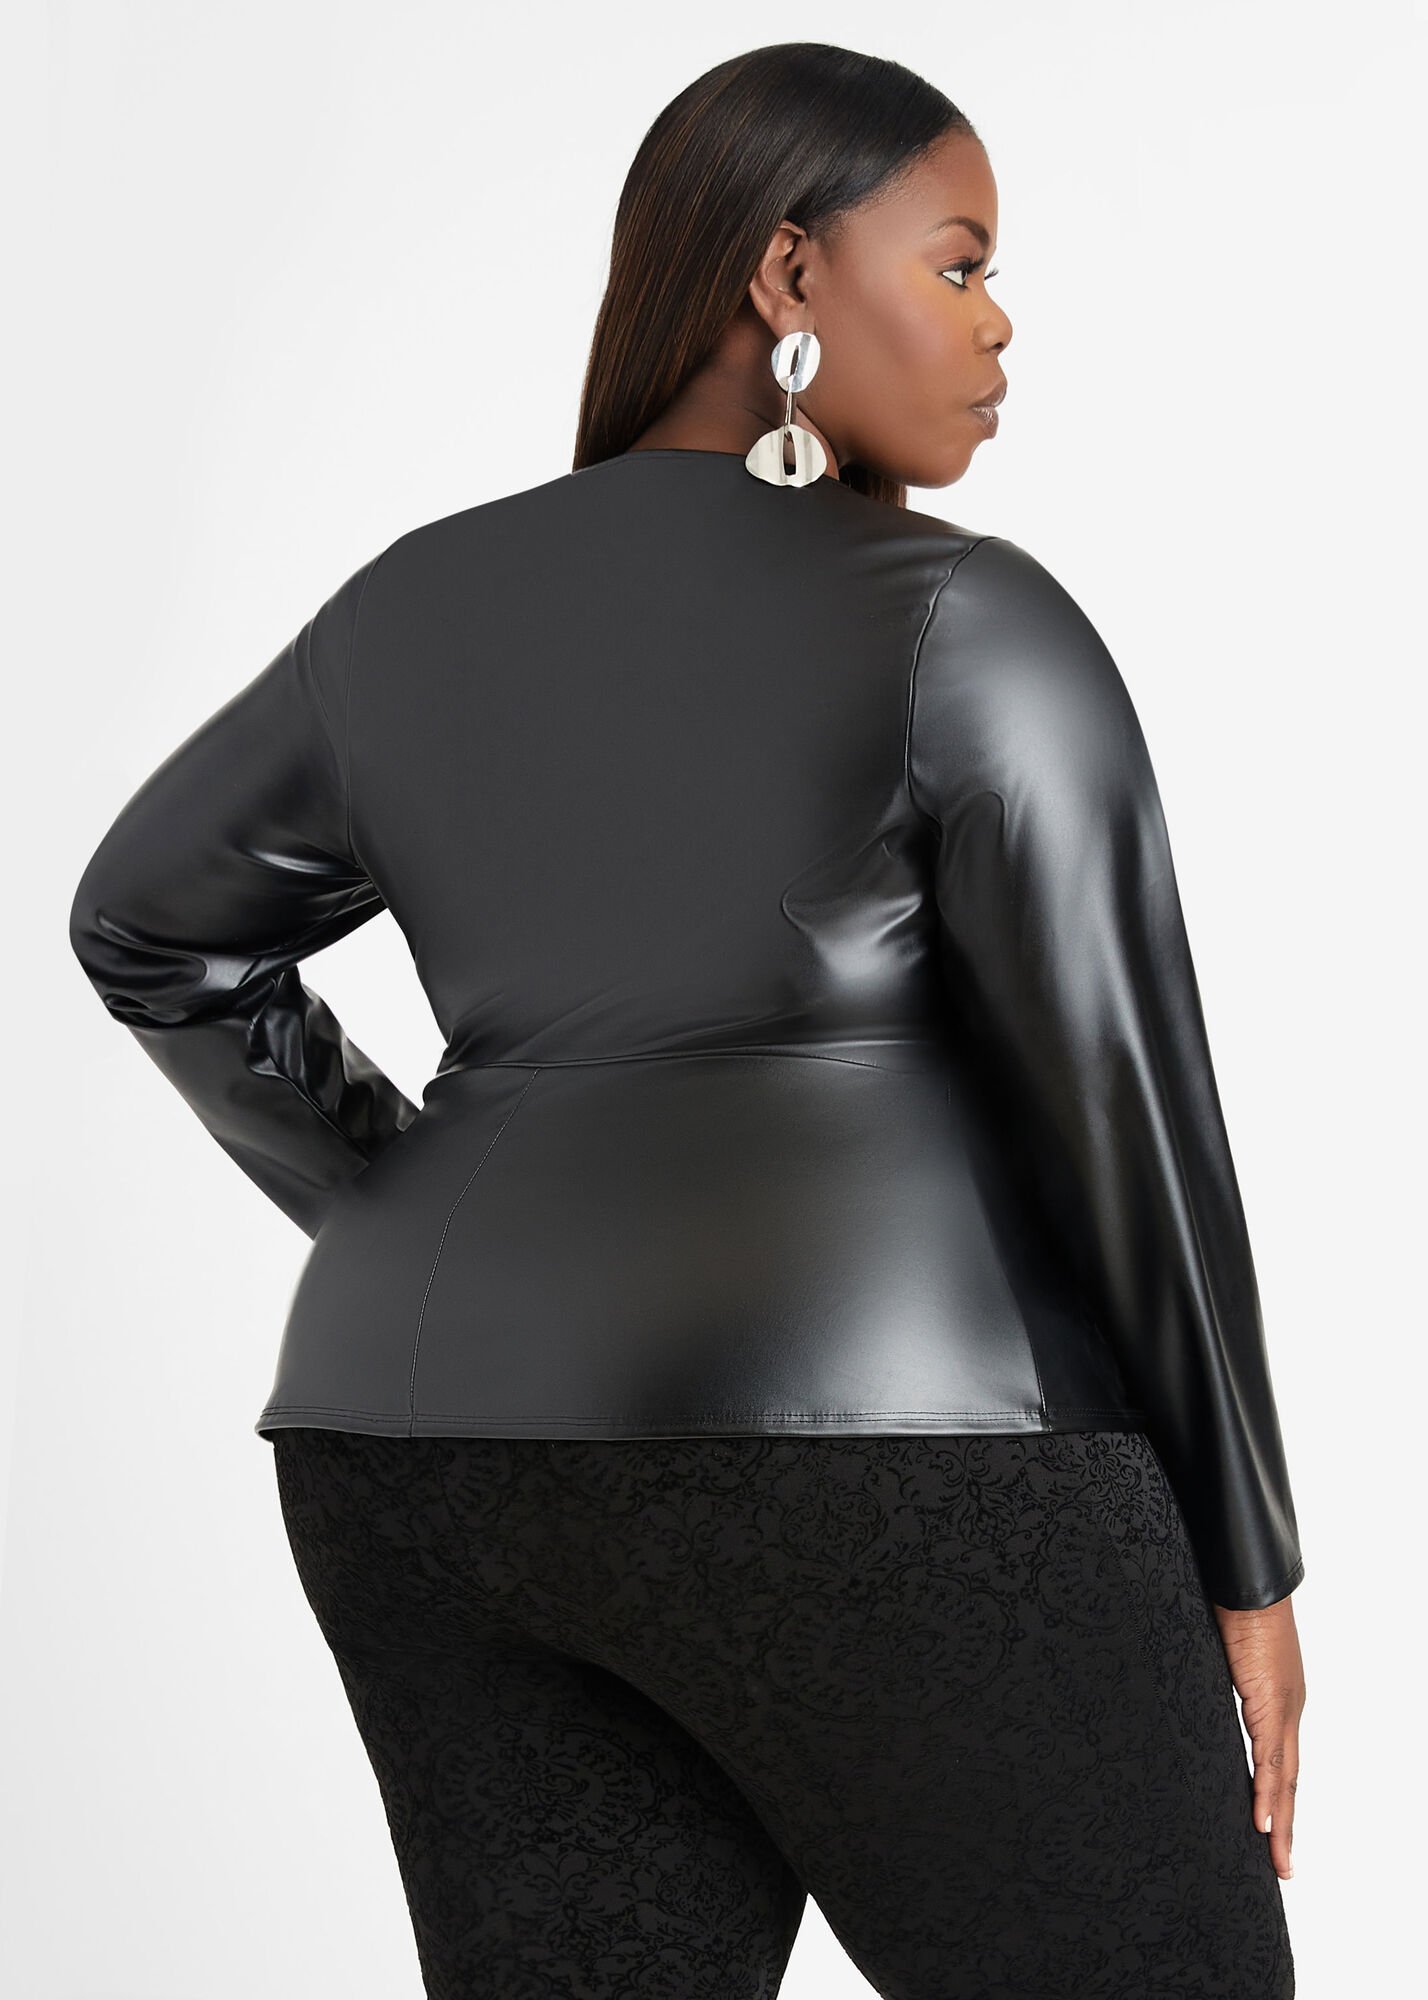 Plus Size Leather Top Vegan Leather Plus Size Leather Tops